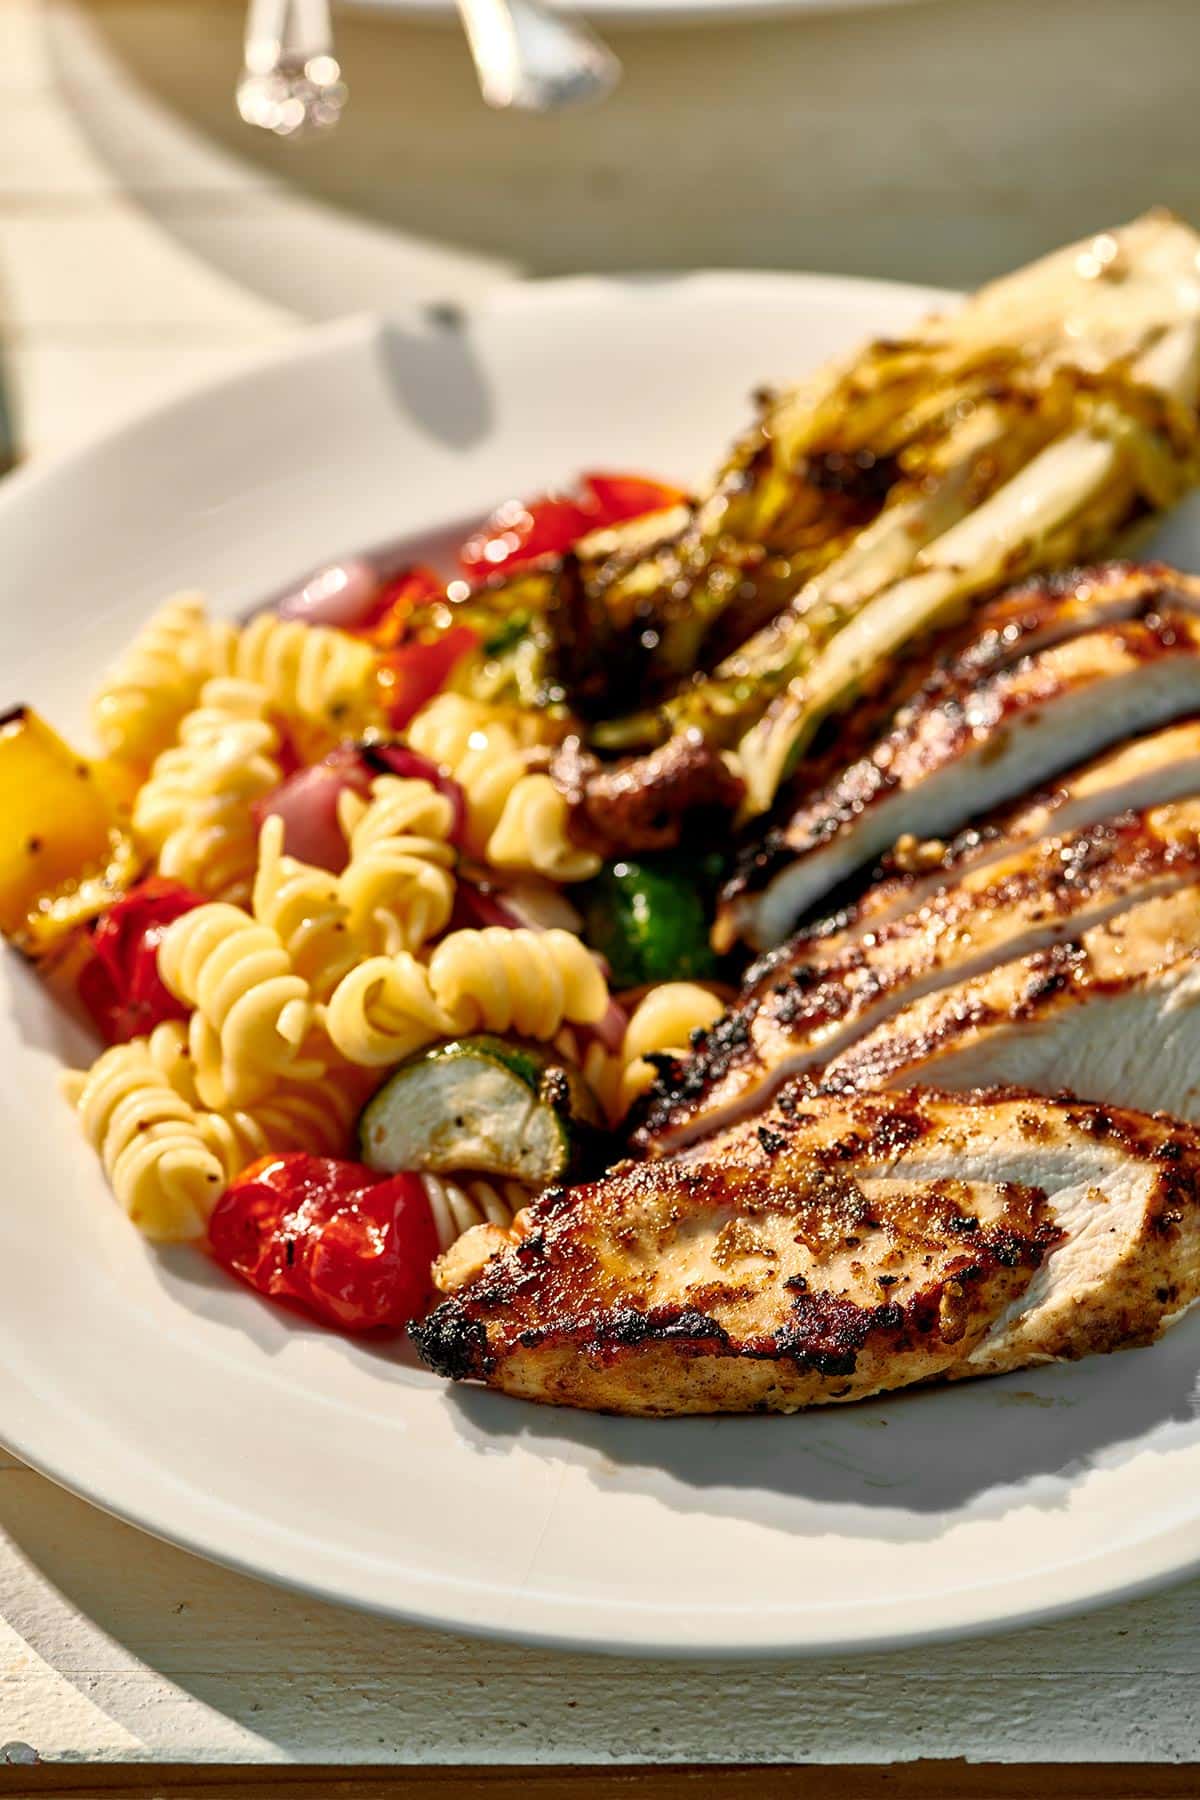 Plating slices of grilled chicken with veggie pasta salad at cookout.